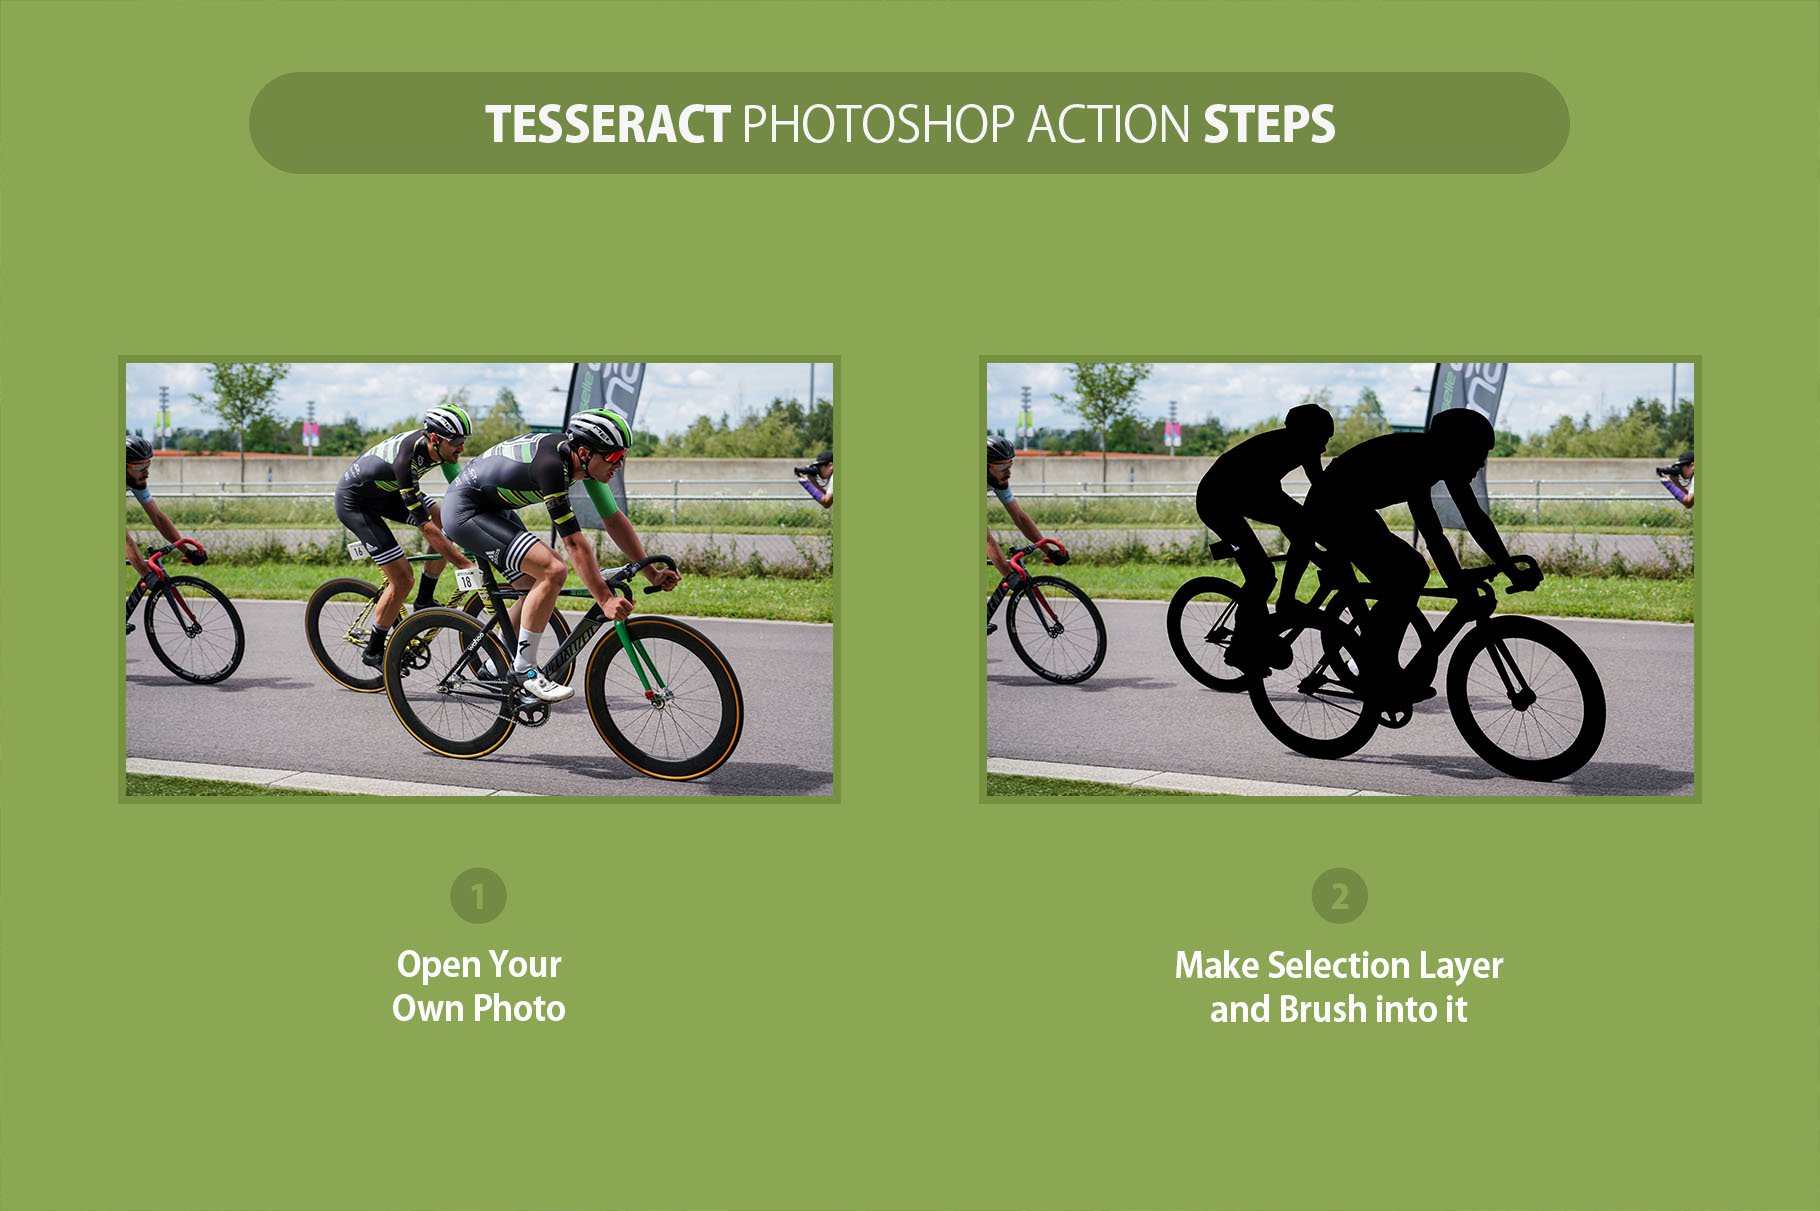 Tesseract Photoshop Actionpreview image.